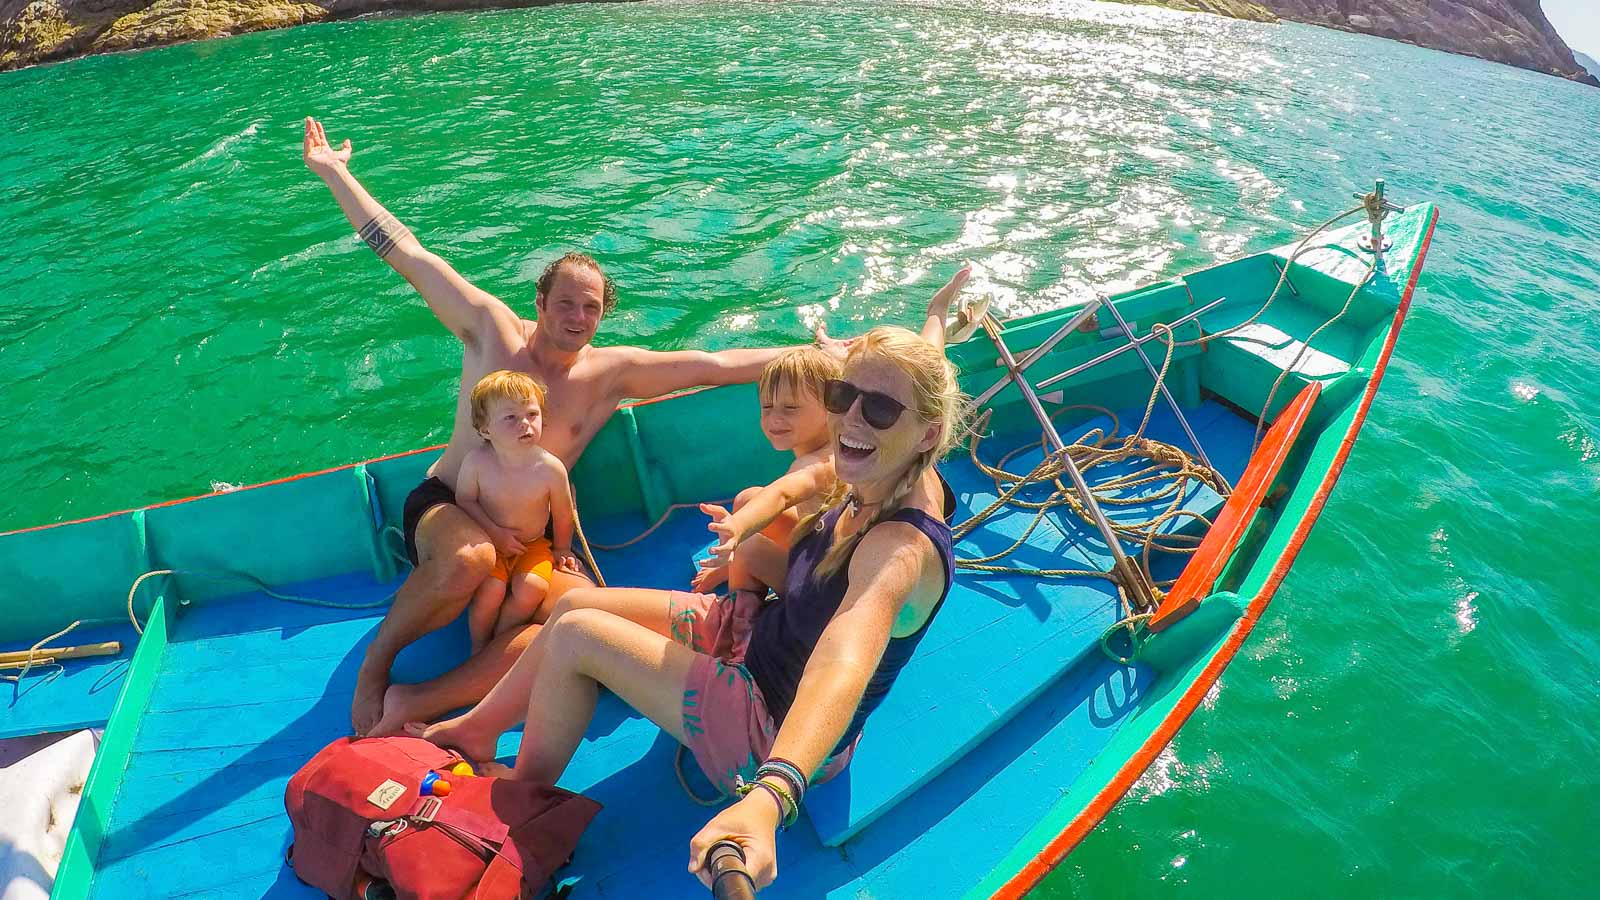 family sitting on a blue boat in turquoise water in thailand